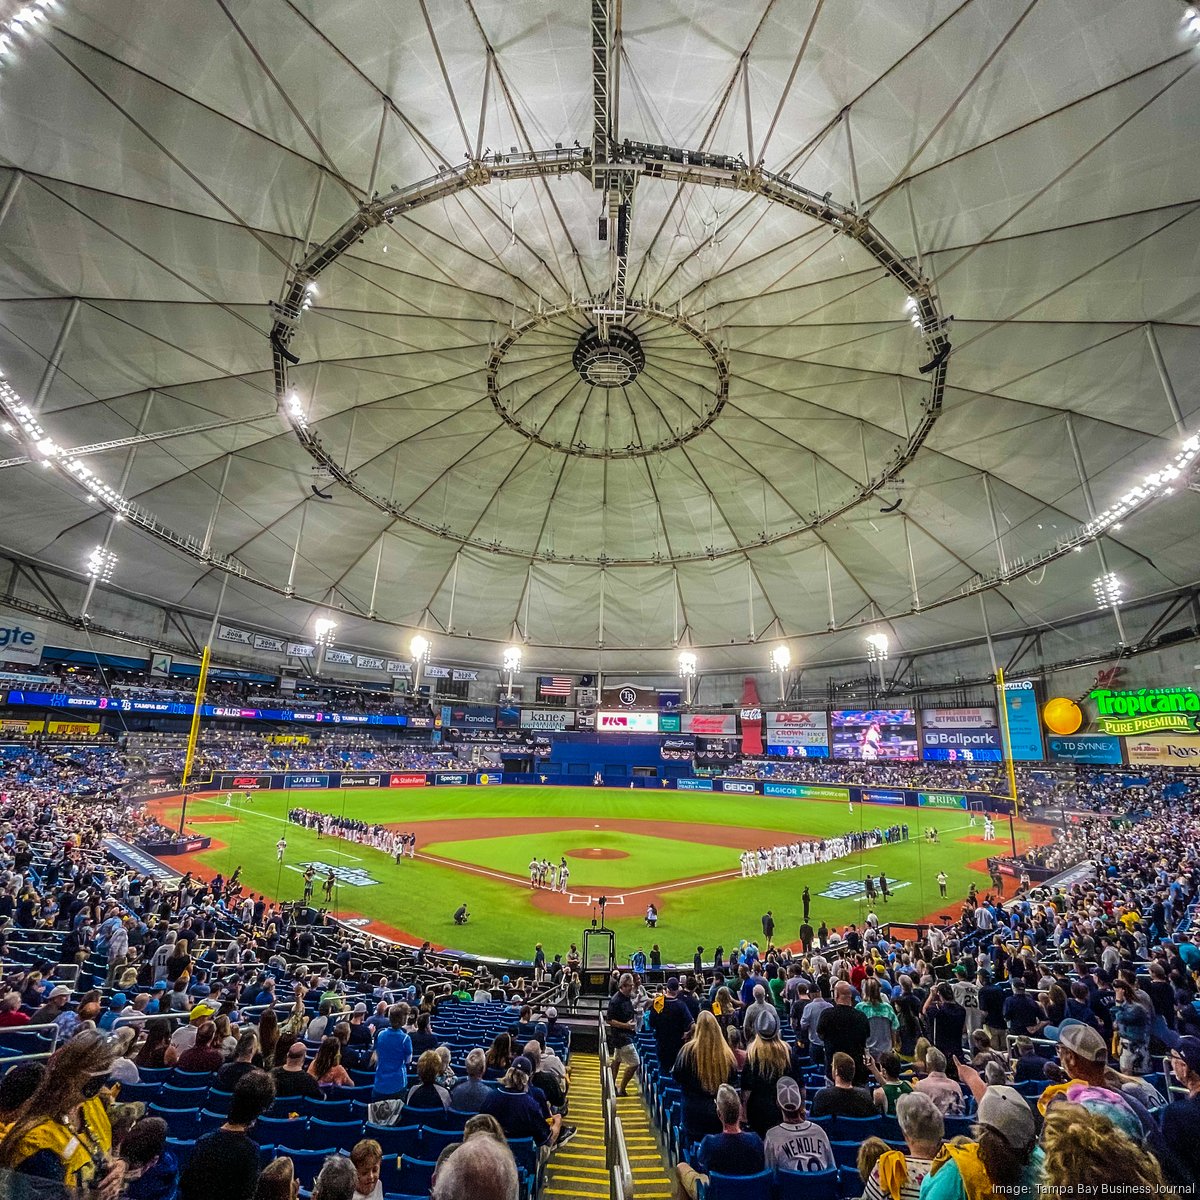 The Montreal perspective on the Rays' split-season proposal